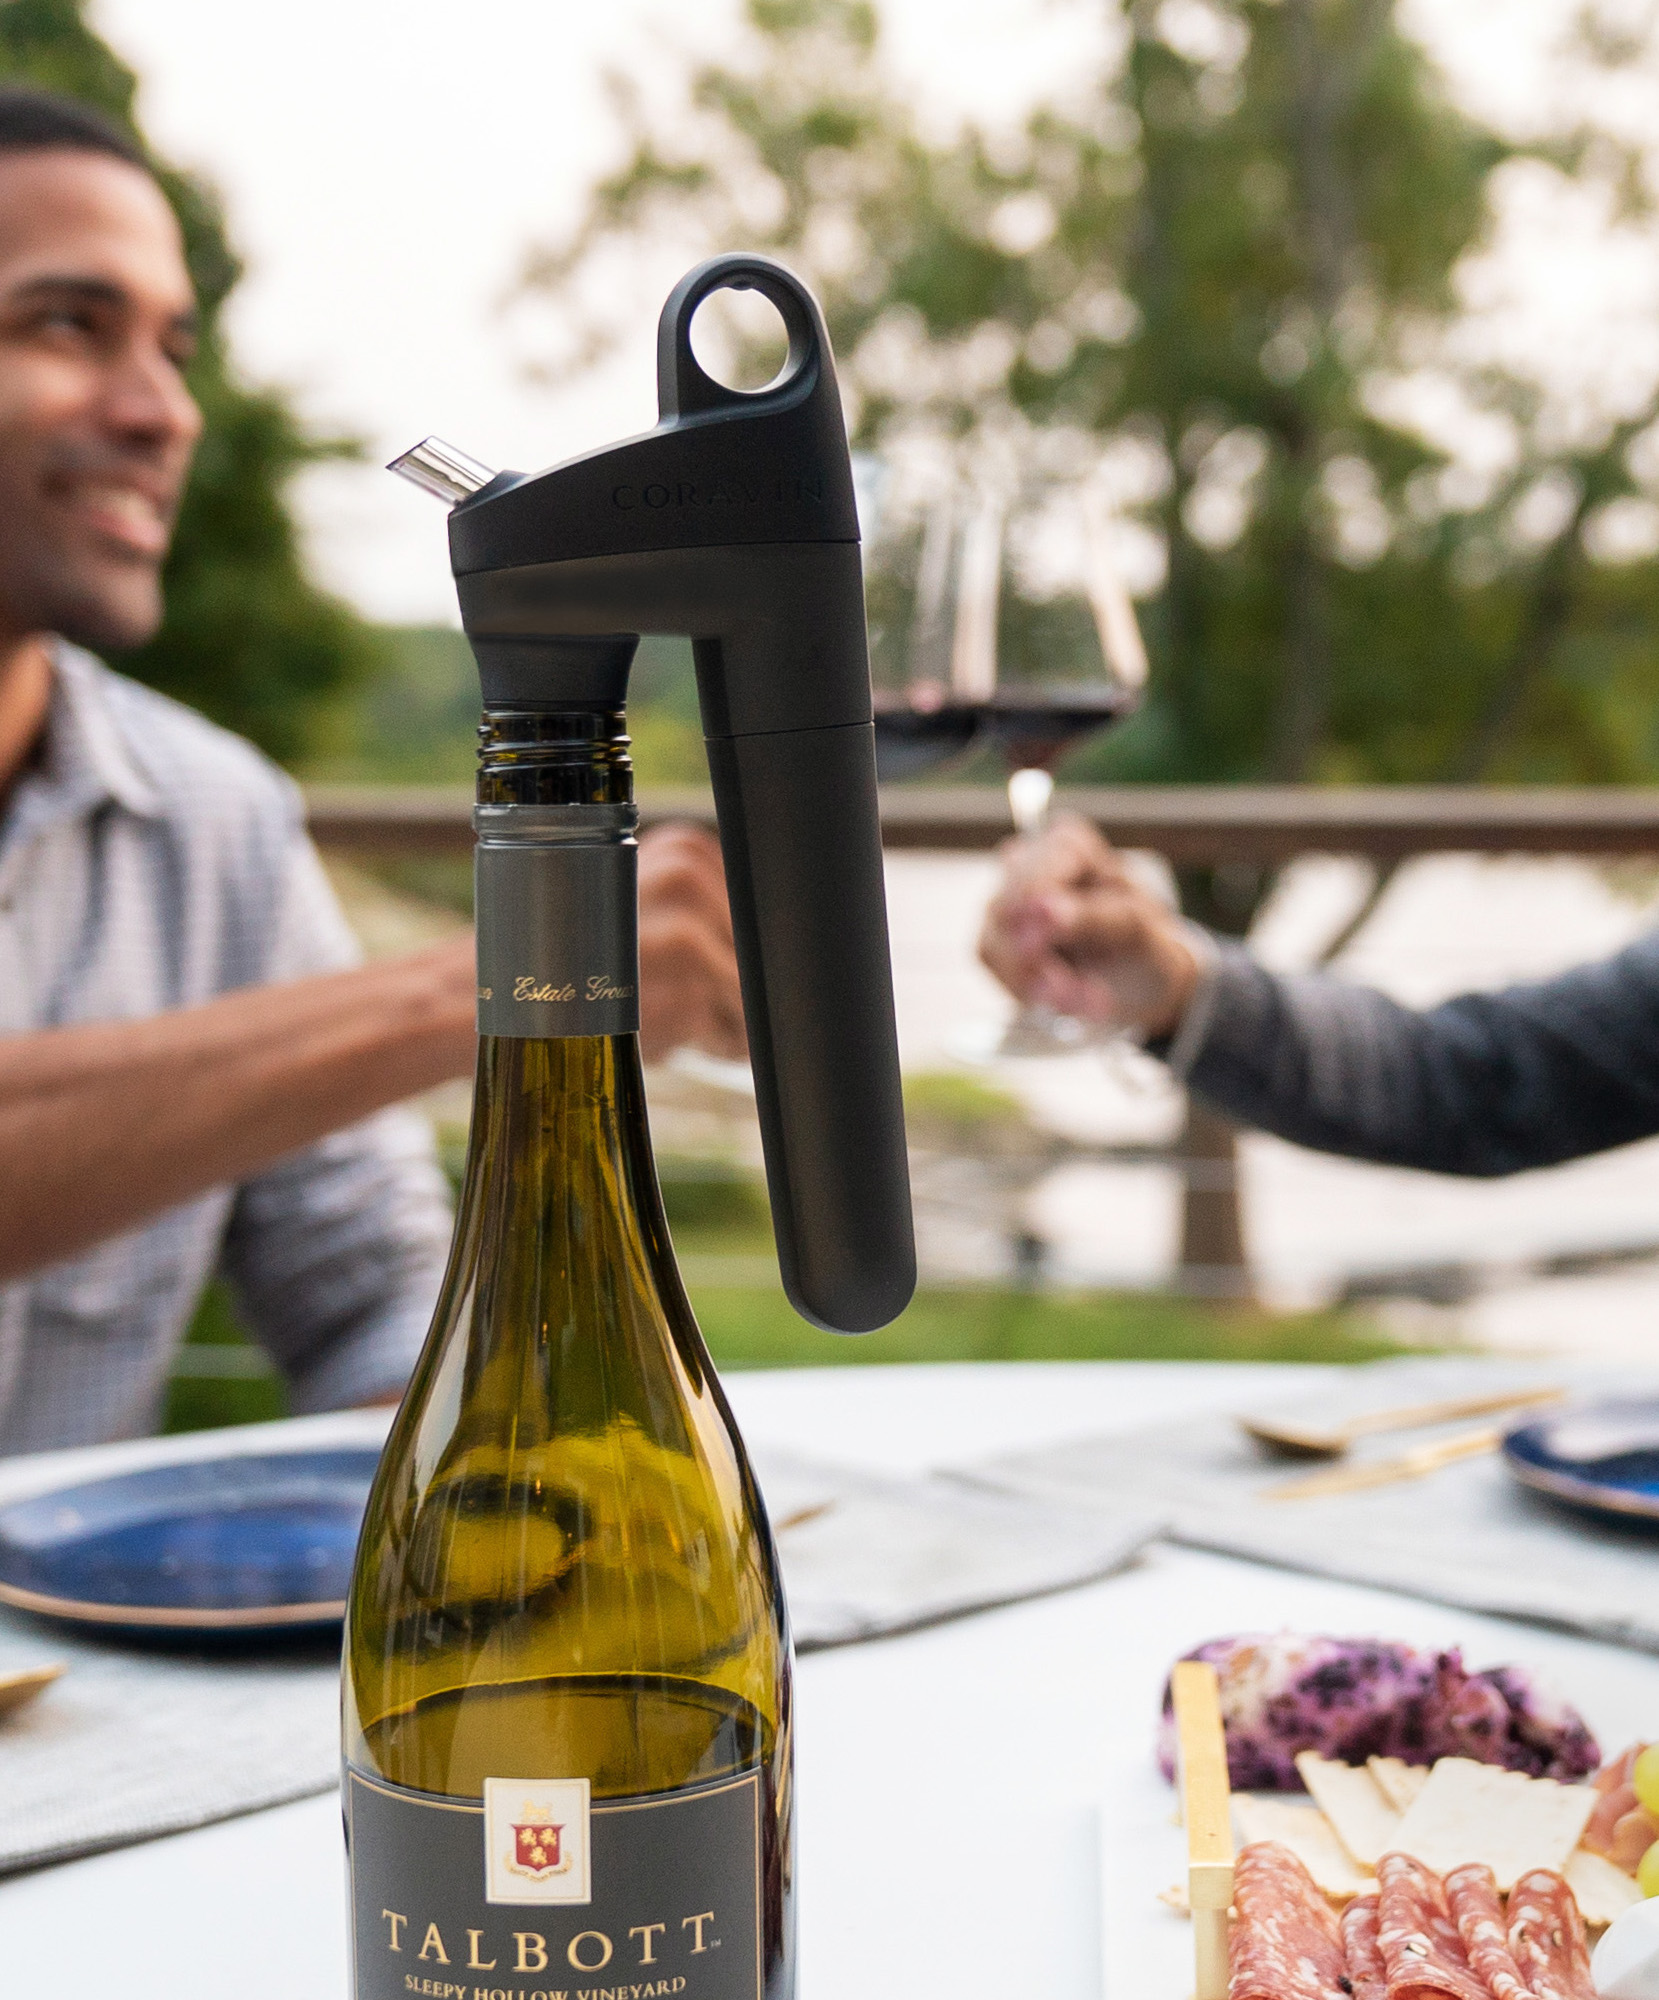 The Brevino Wine Bottle Insulator - Keeping Wine Chilled